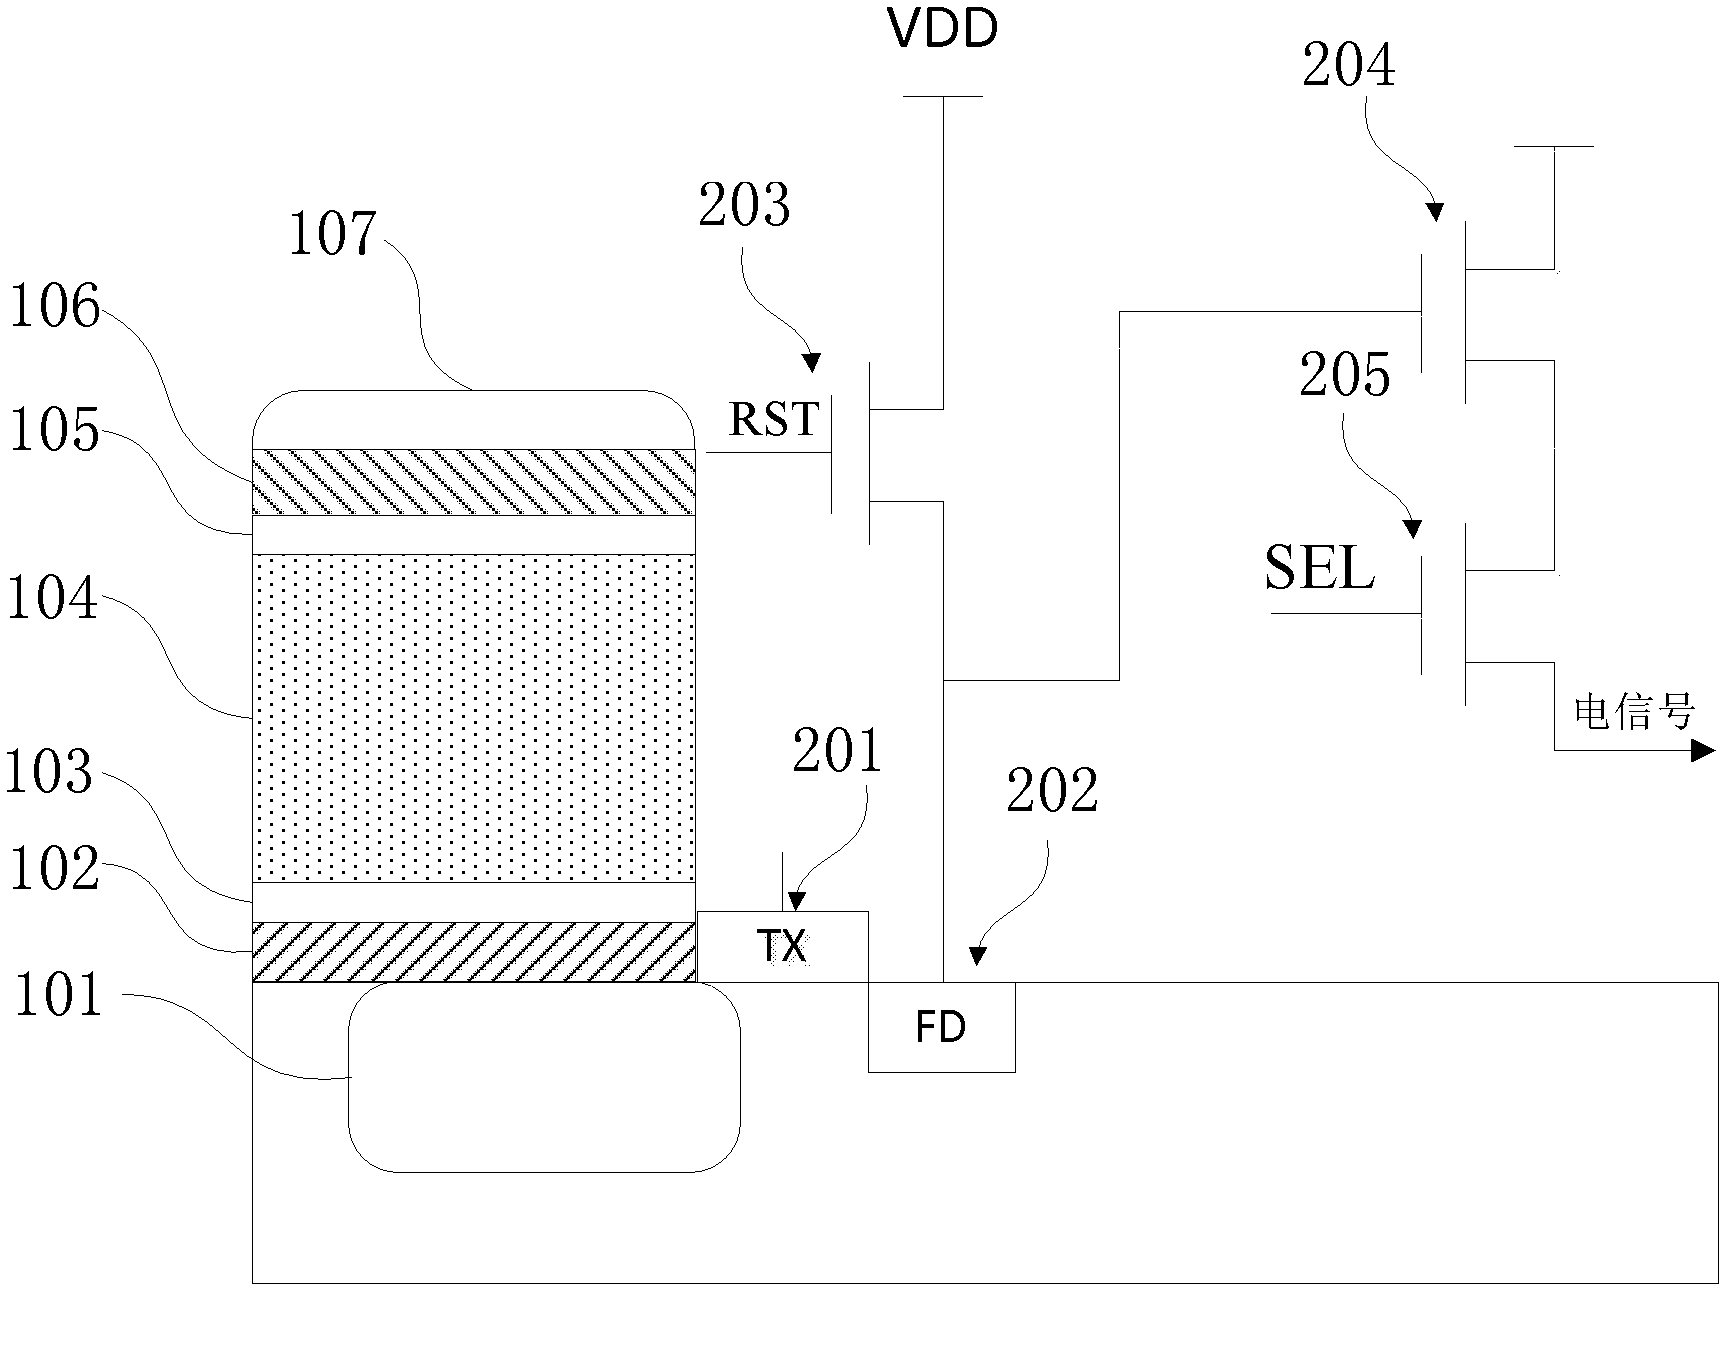 CMOS (Complementary Metal-Oxide-Semiconductor) image sensor